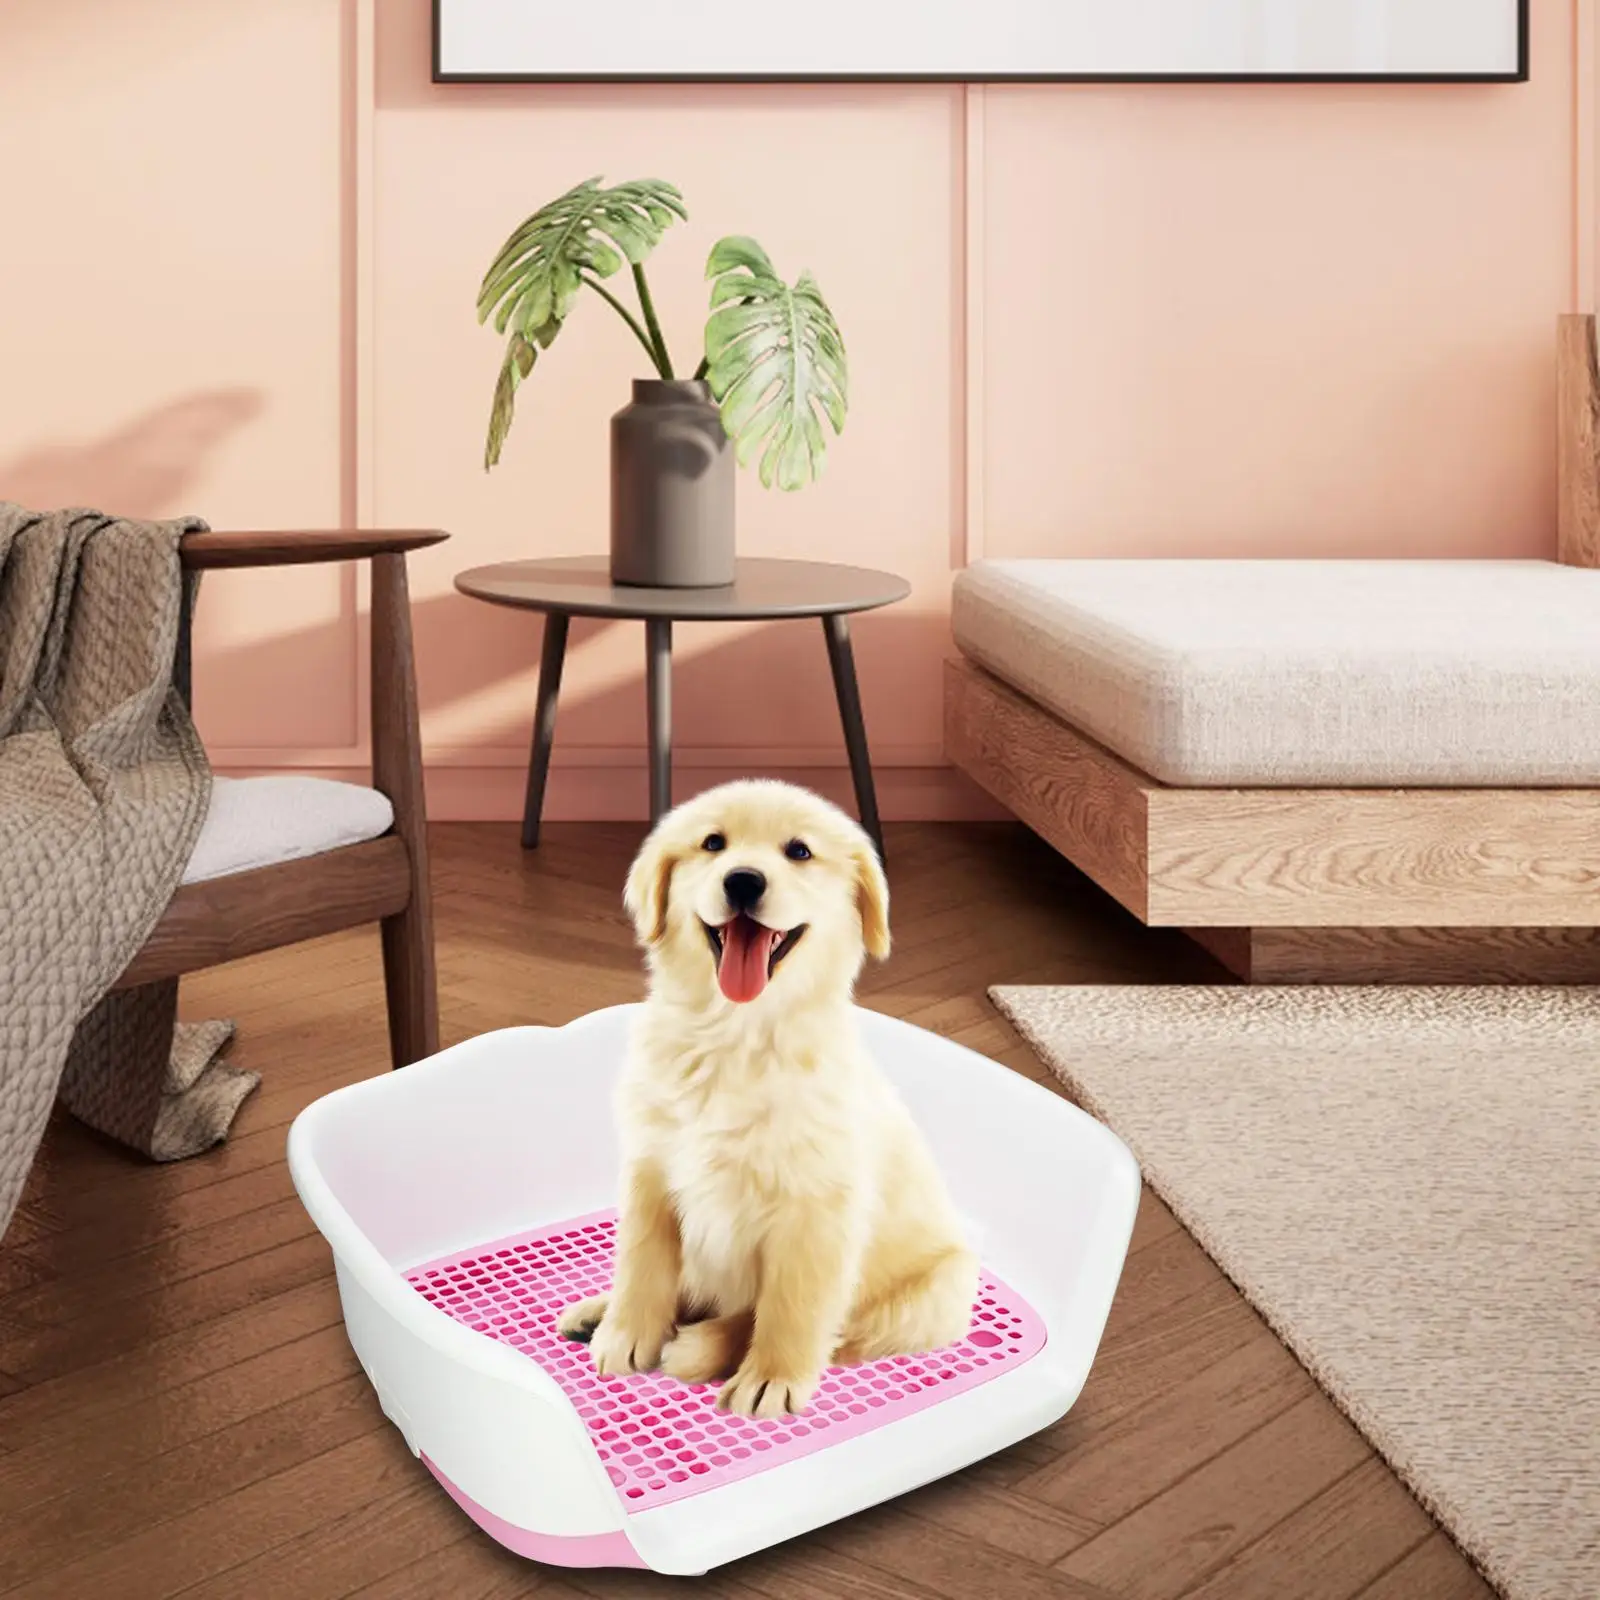 Removable Dog Potty Tray Keep Floors Clean with Protection Wall